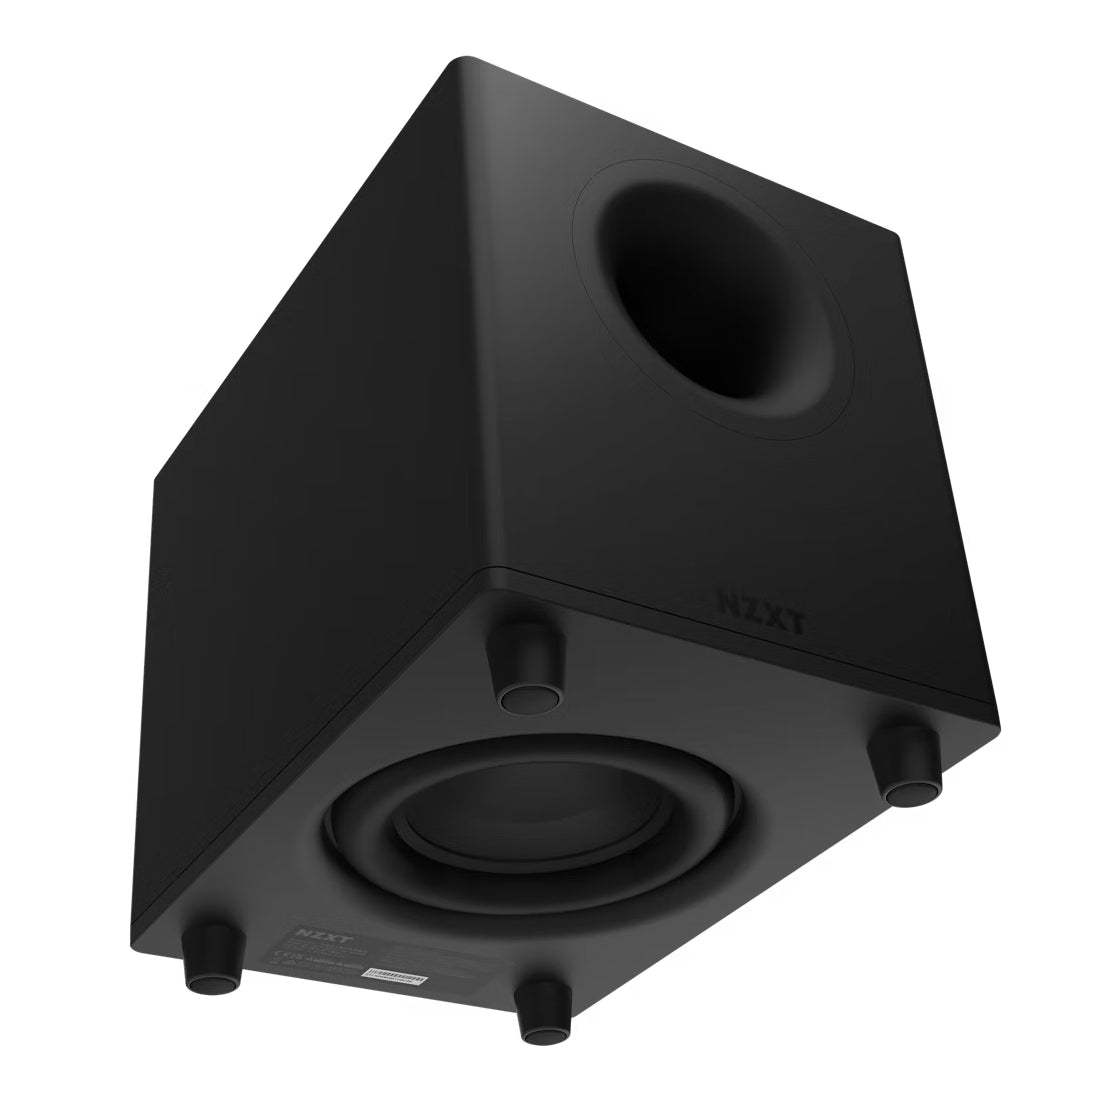 NZXT Relay 140W Desktop PC Gaming Subwoofer - مكبر صوت - Store 974 | ستور ٩٧٤